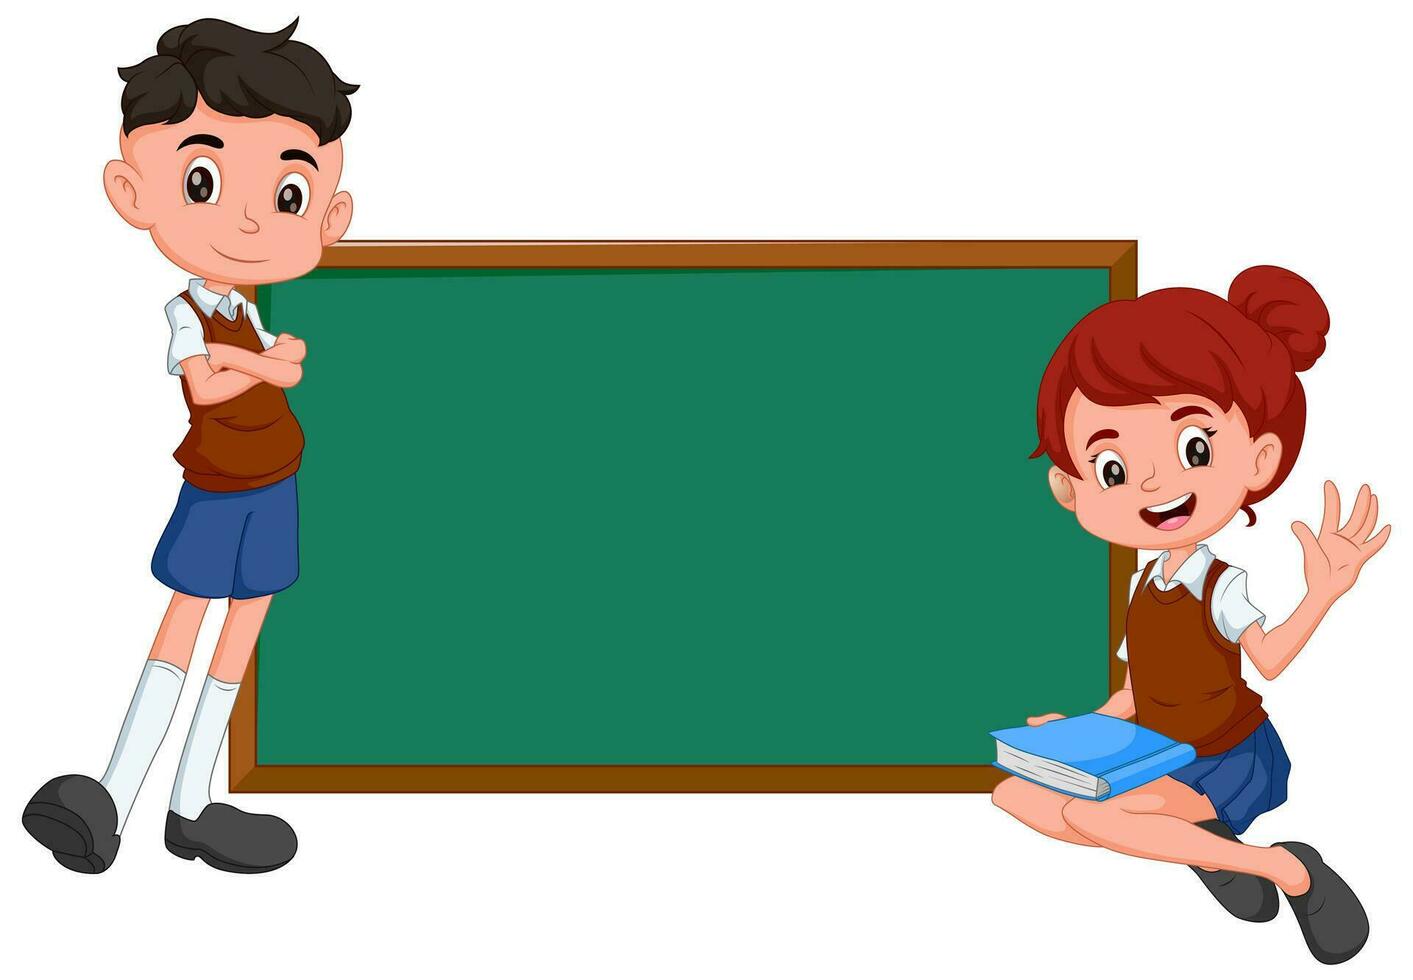 Illustration of cute childrens and a green board on a white background. Vector illustration